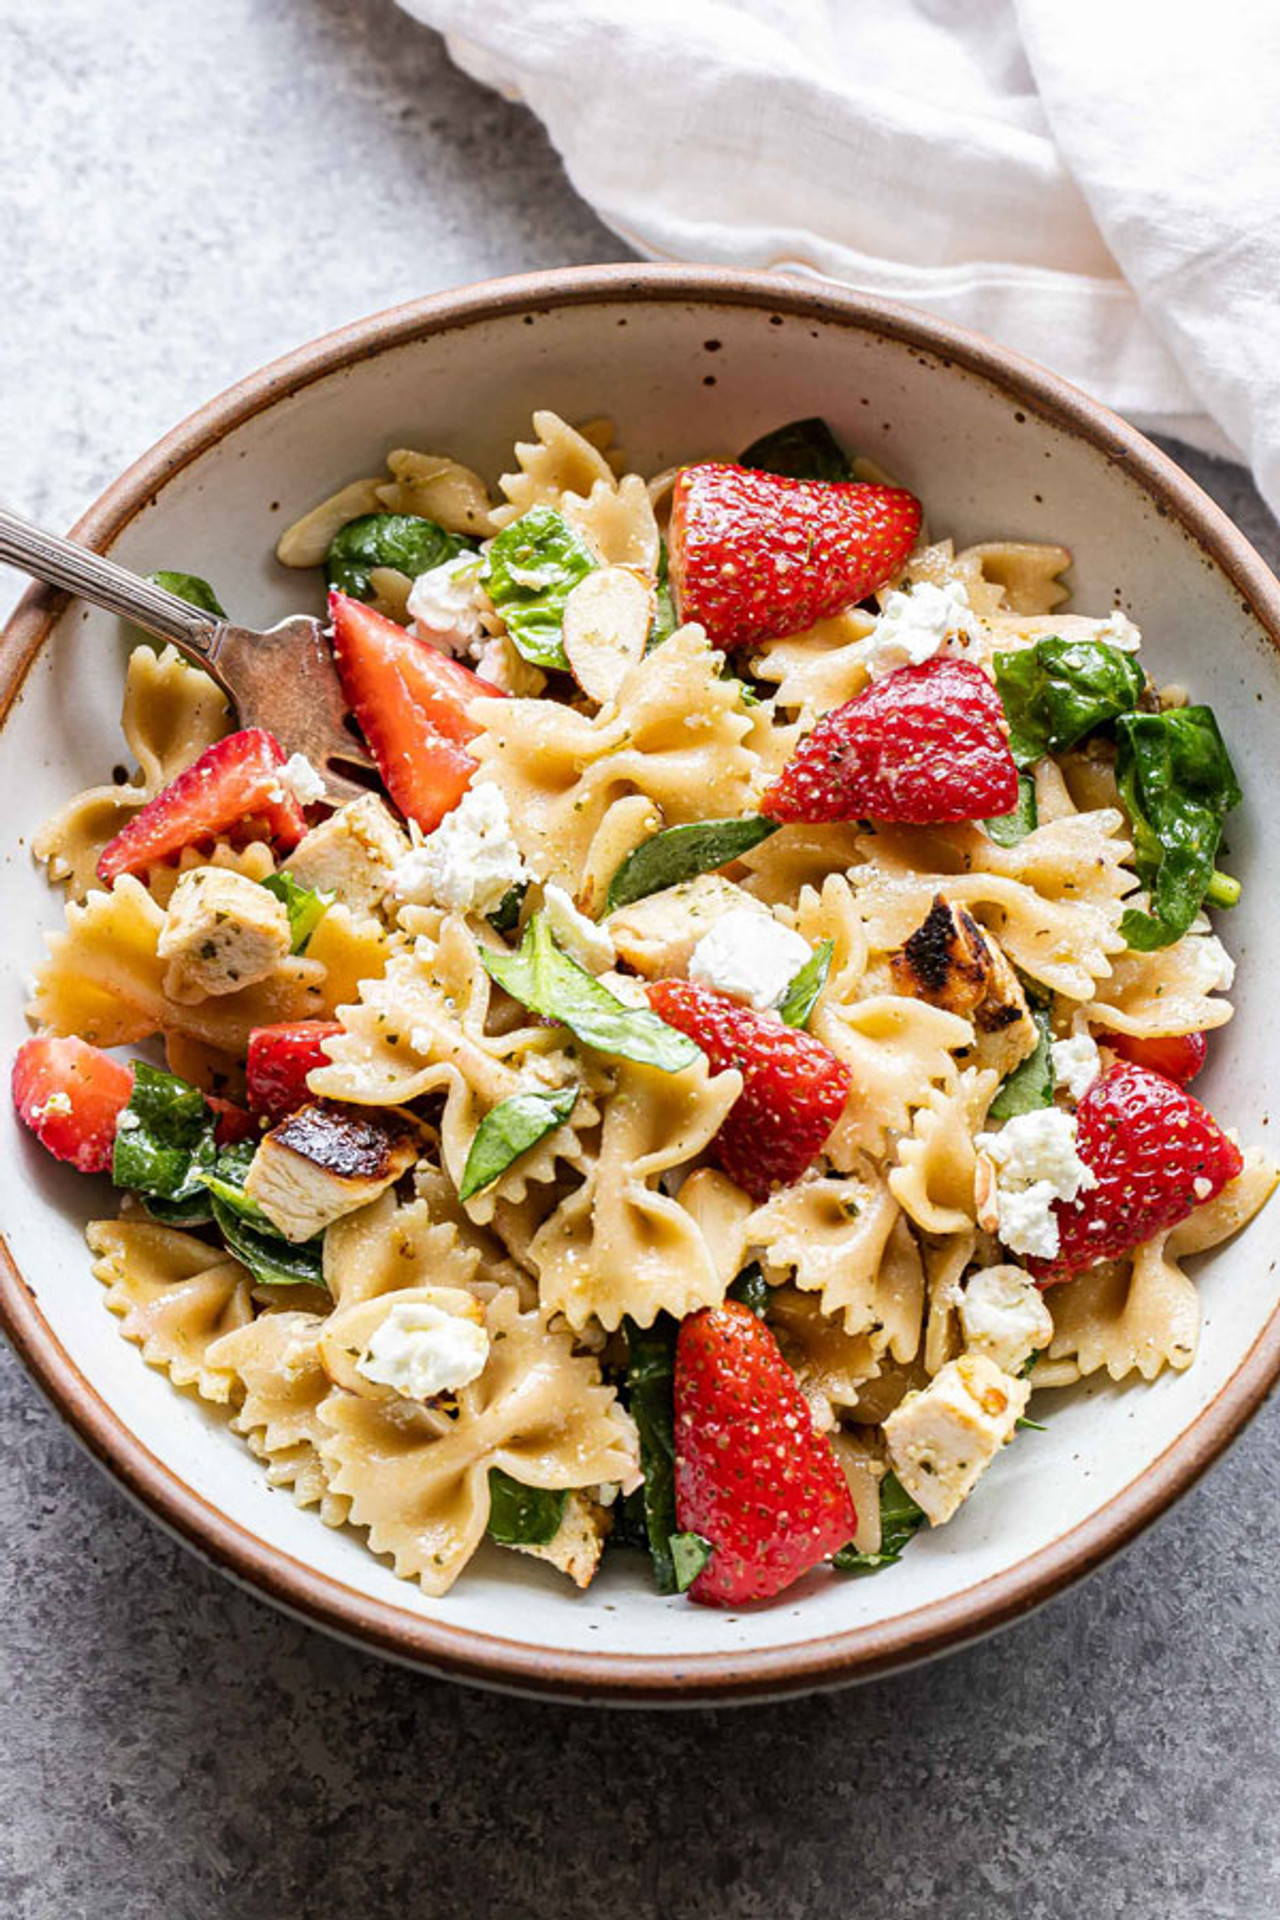 Farfalle pasta with grilled chicken, strawberries, spinach and more